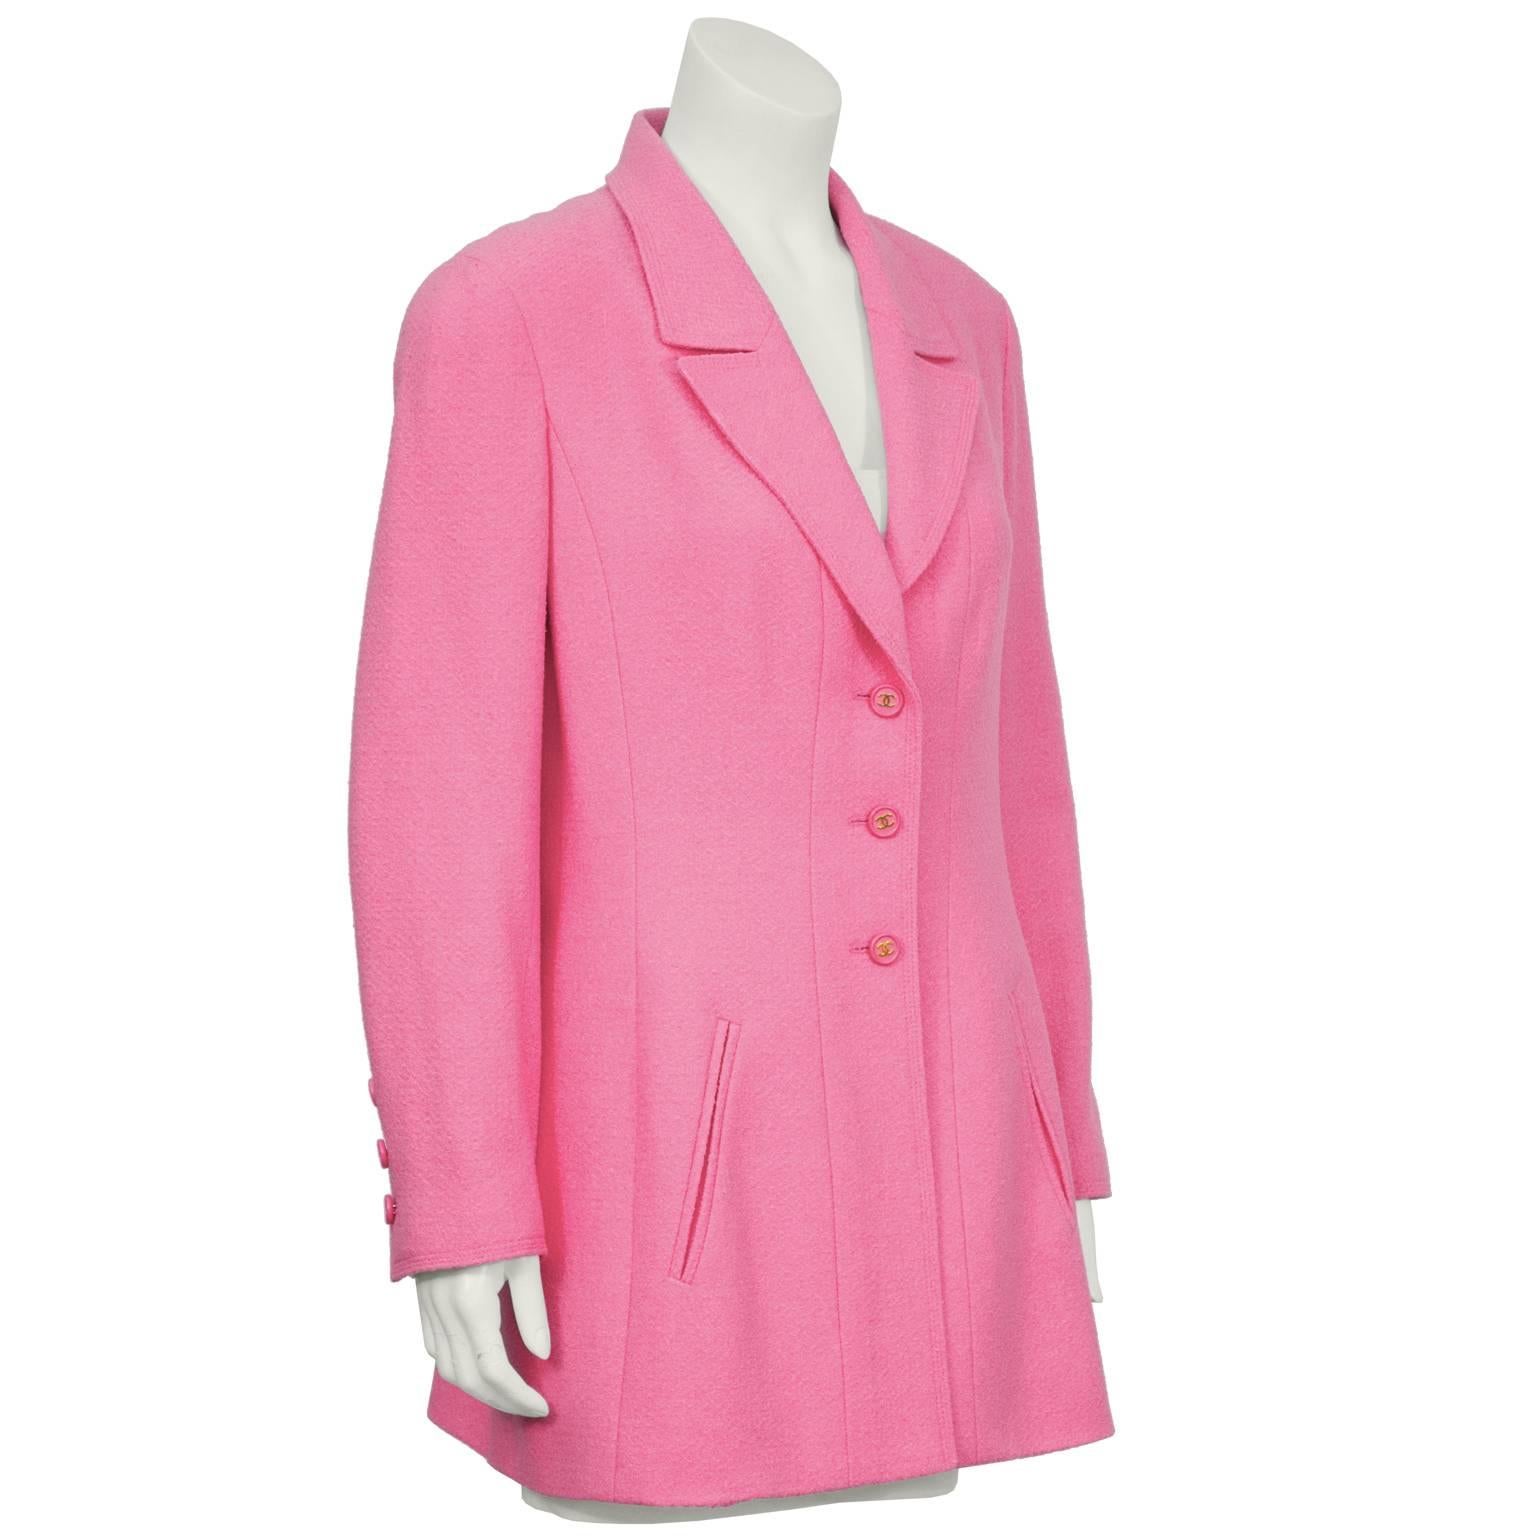 Chanel 1997 pink long line jacket with a notch lapel and diagonal slit pockets on the front. Jacket fastens up the front with pink and gold CC buttons and falls to the mid hip. Matching buttons at the cuffs, signature gold chain sewn into interior